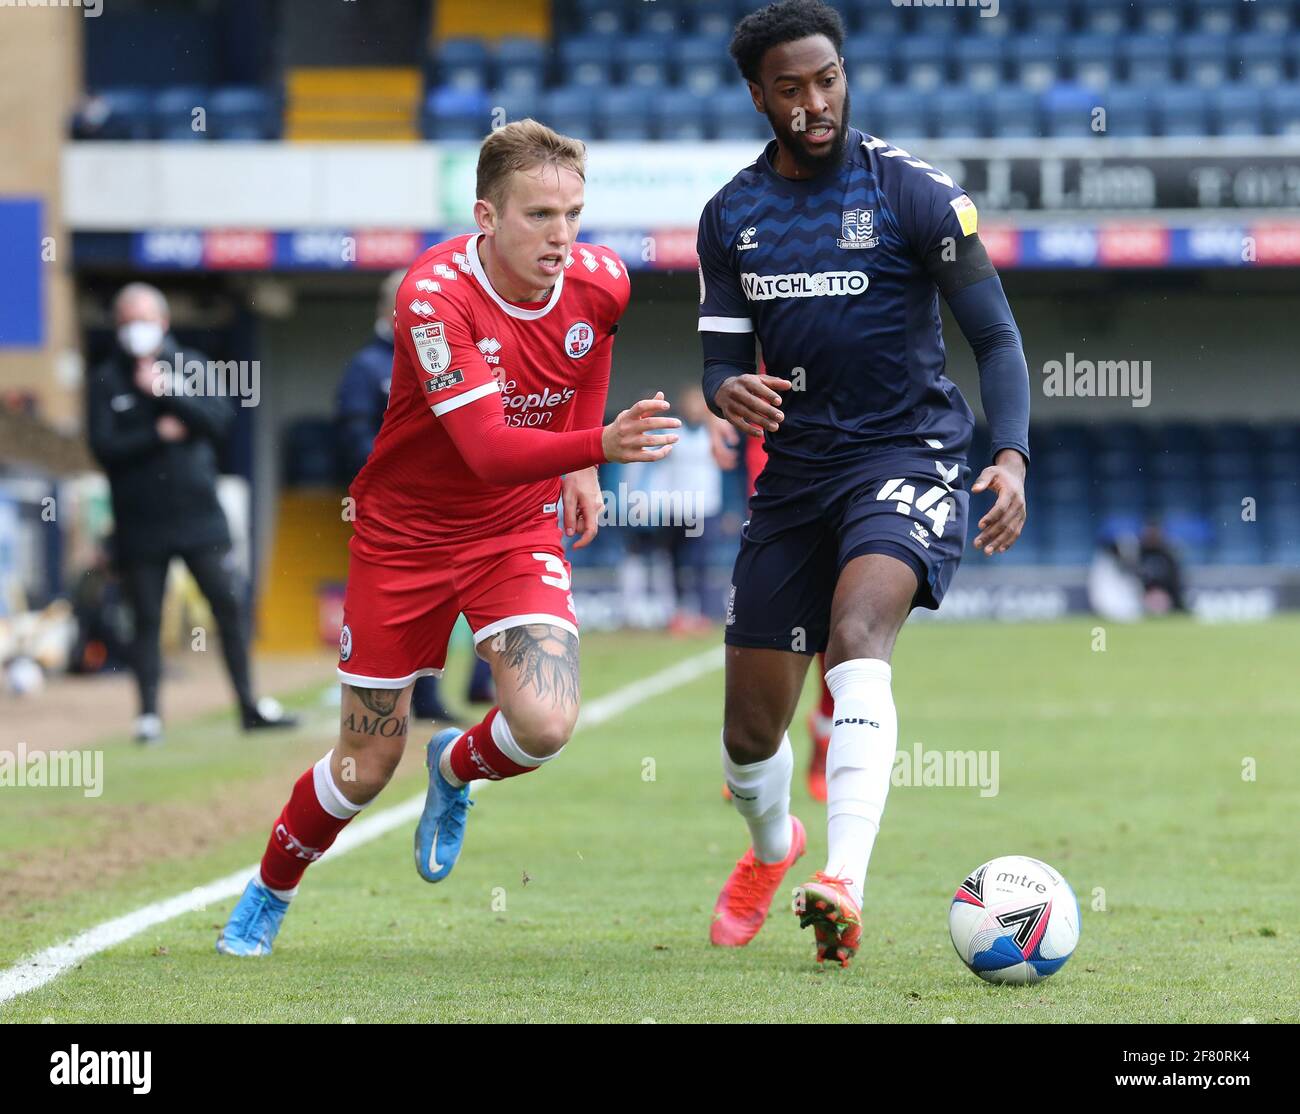 Southend, UK. 10th Apr, 2021. SOUTHEND, ENGLAND - APRIL 10: L-R Jordan  Maquire-Drew of Crawley Town and Nathan Ferguson of Southend United during  Sky Bet League Two between Southend United and Cawley